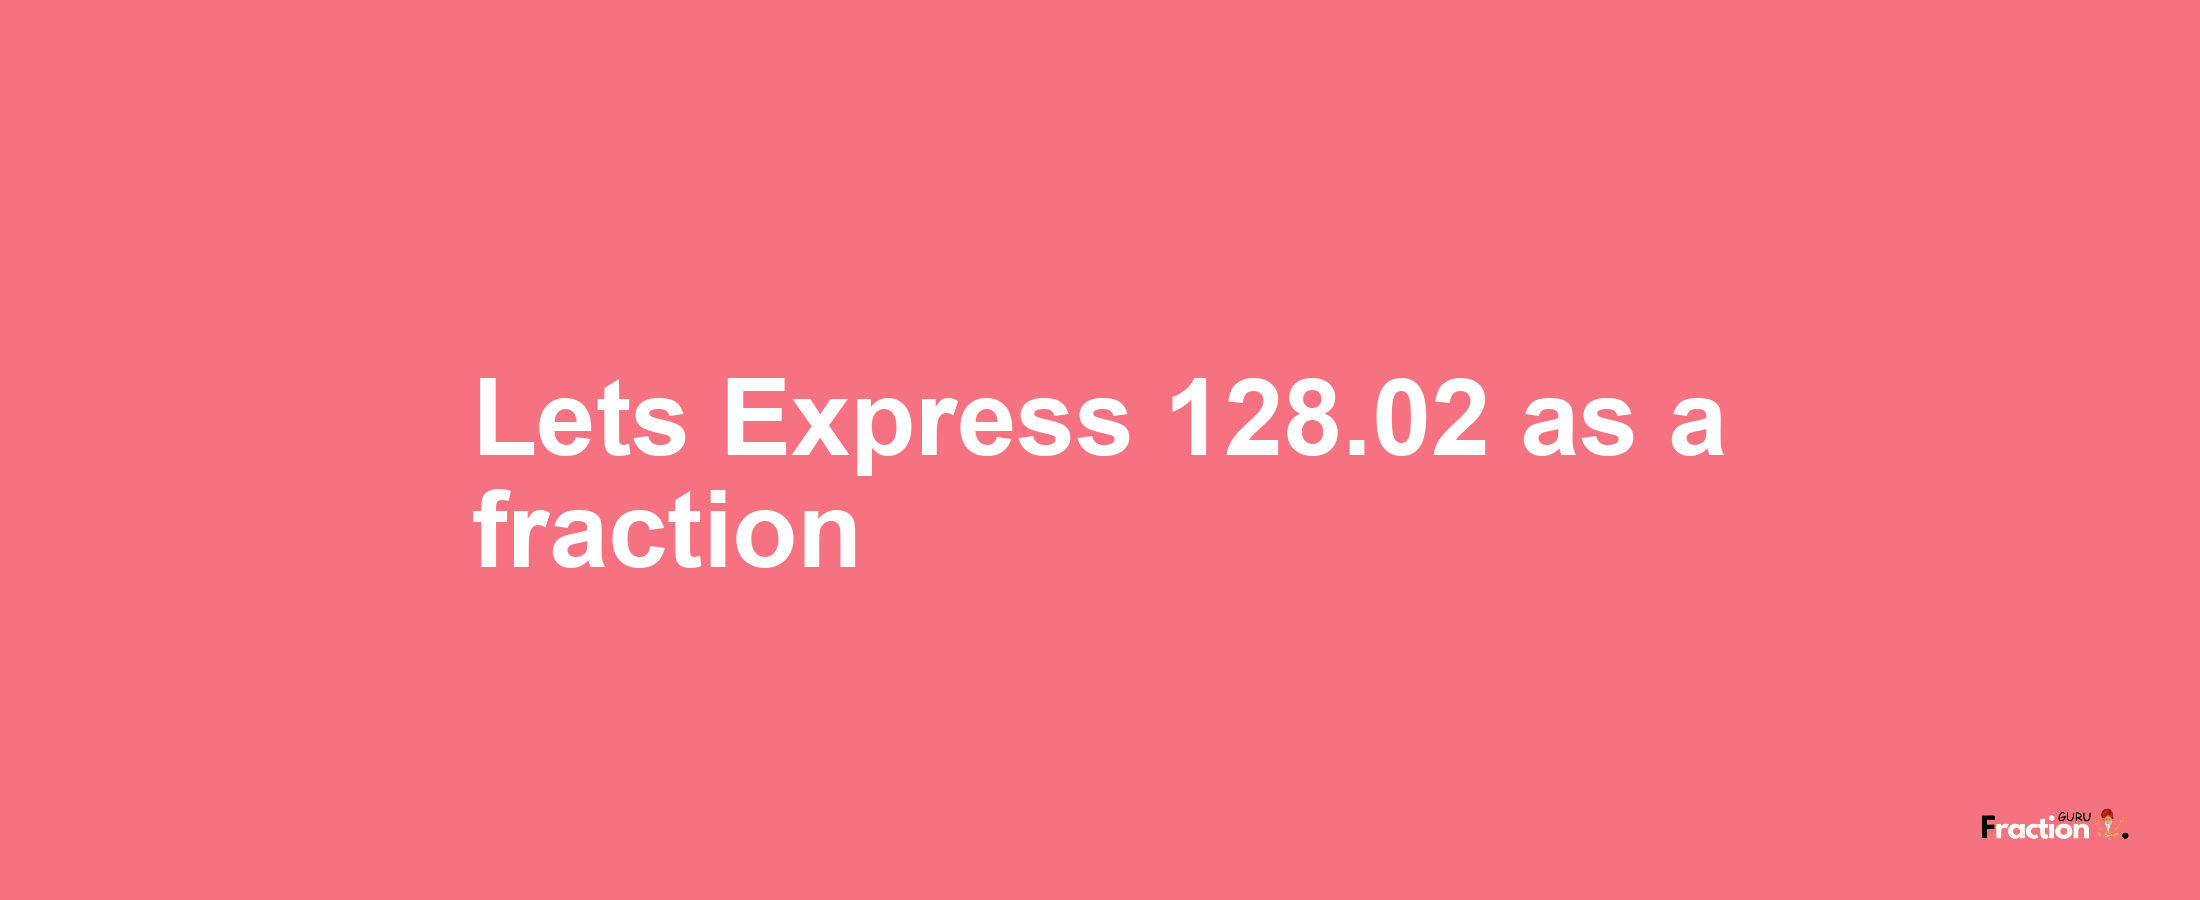 Lets Express 128.02 as afraction